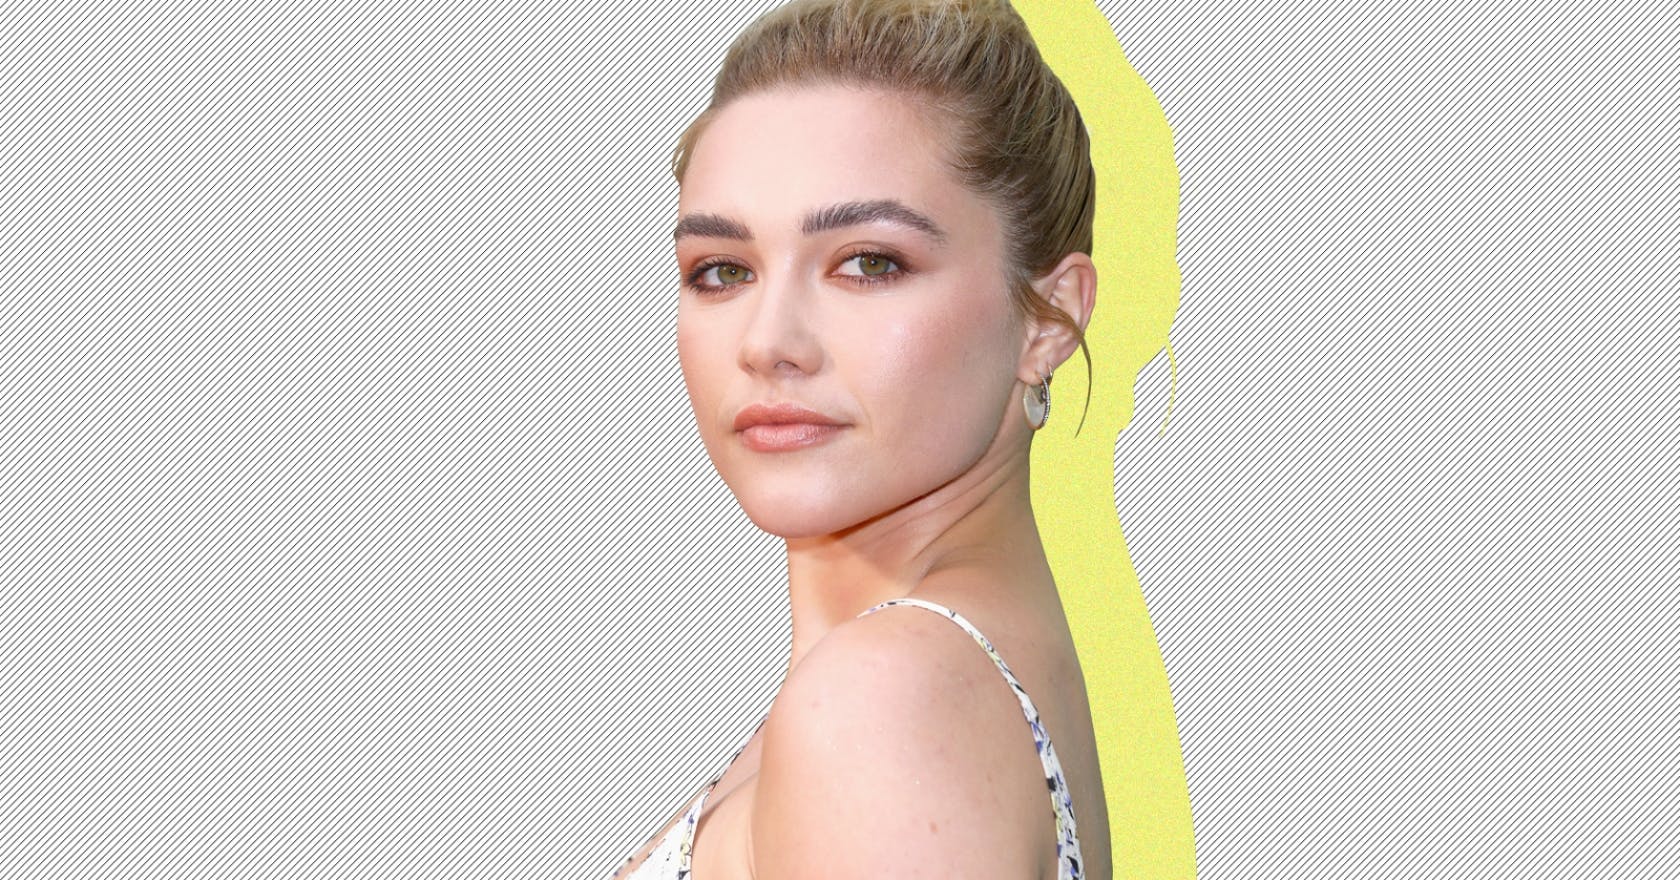 Florence Pugh has revealed her latest movie role and it is truly wild